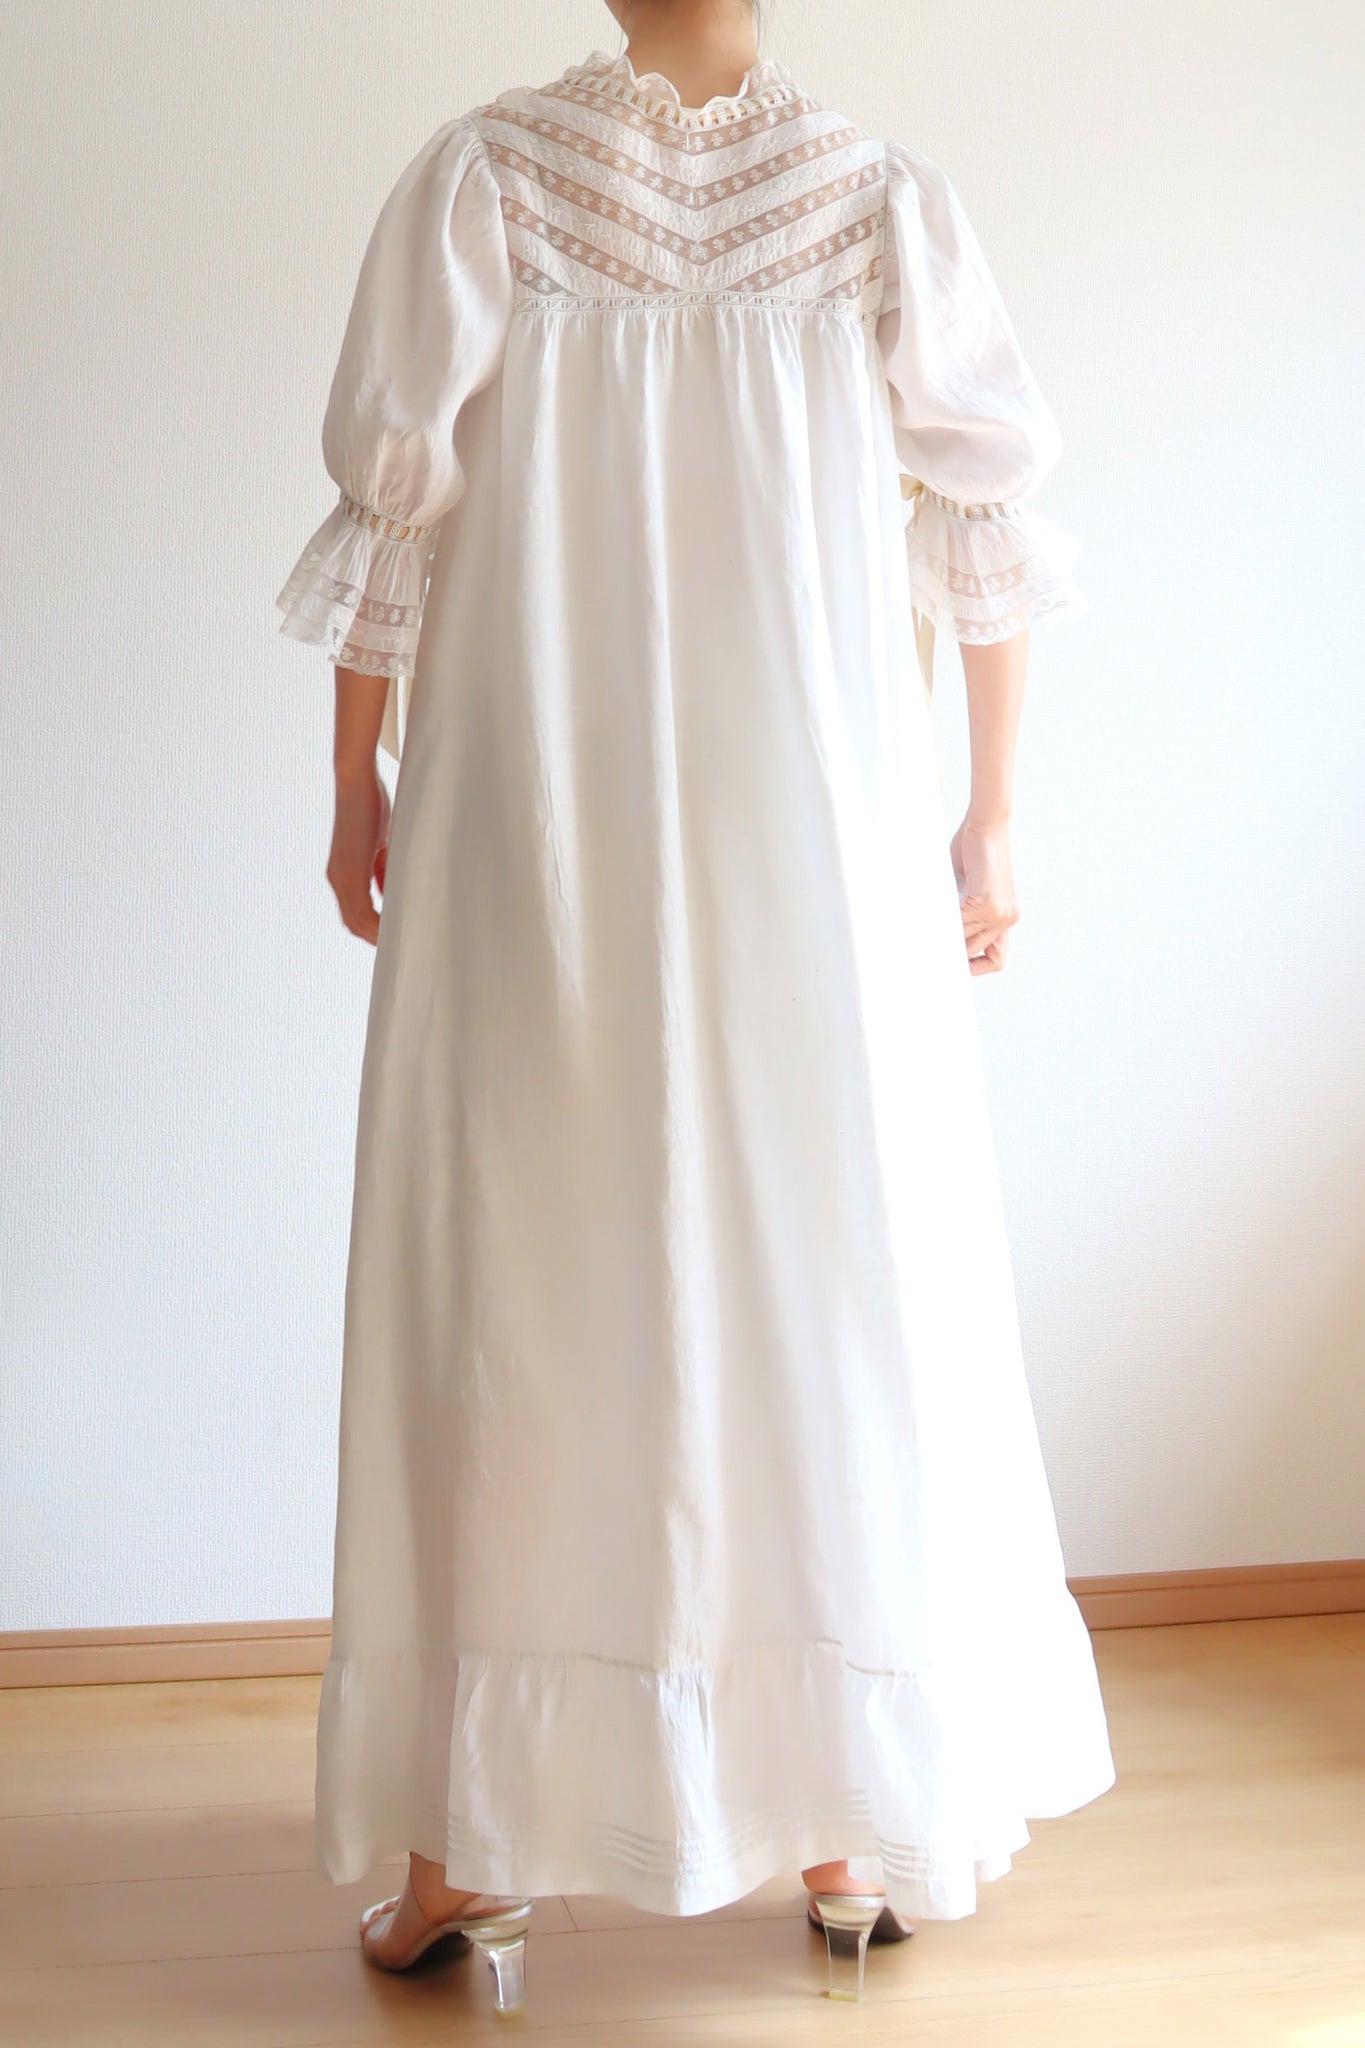 1900s Hand Embroidery Lawn Linen Dress